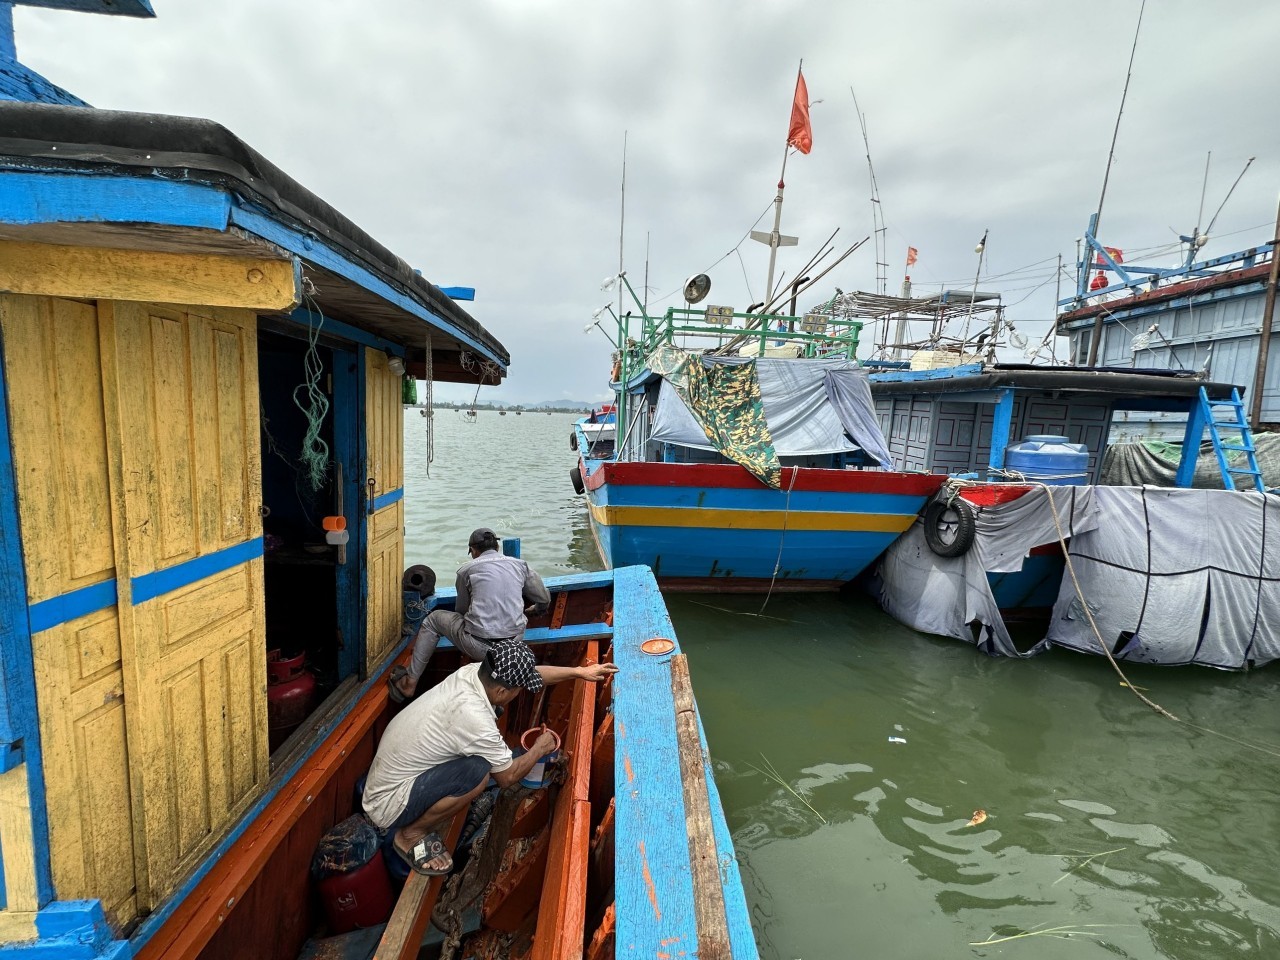 Nui Thanh District, Quang Nam Province: Elderly Fishermen Still Flock to Sea